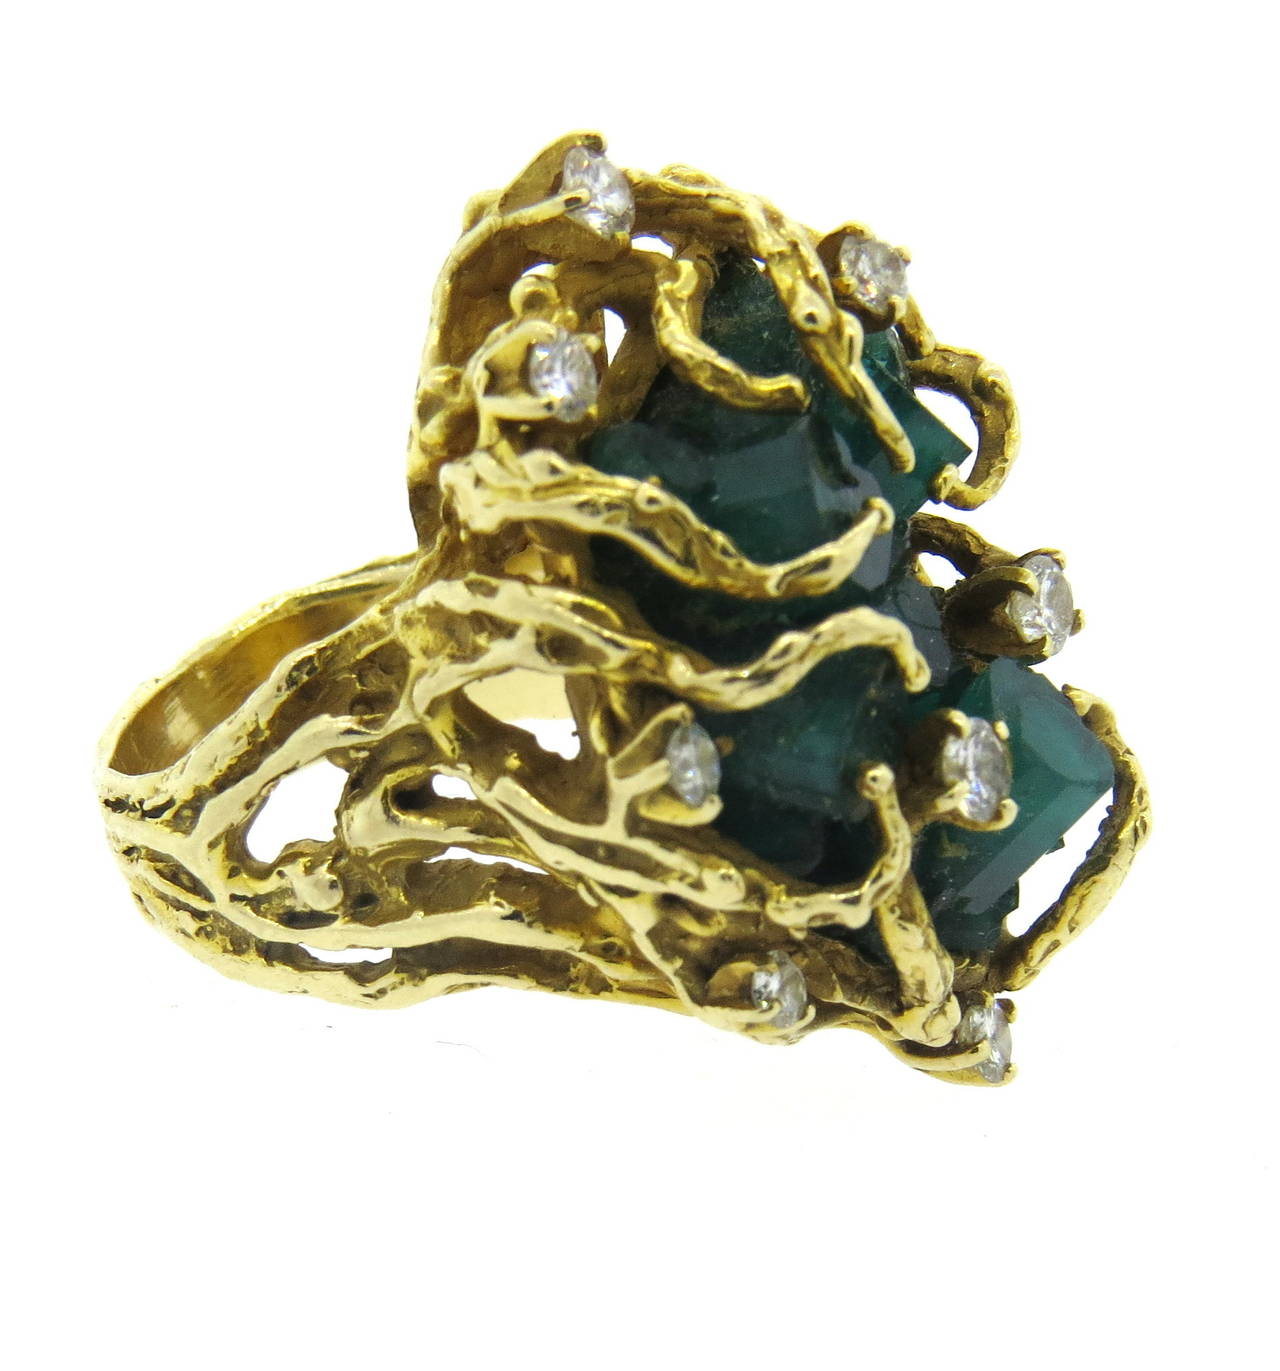 Vintage 14k gold free form ring, featuring Chatham emeralds and approx. 0.50ctw in VS-SI/H diamonds. Ring is a size 7 1/2, ring top is 32mm x 22mm, sits approx. 14mm from the top of the finger. Weight of the piece - 23.8 grams